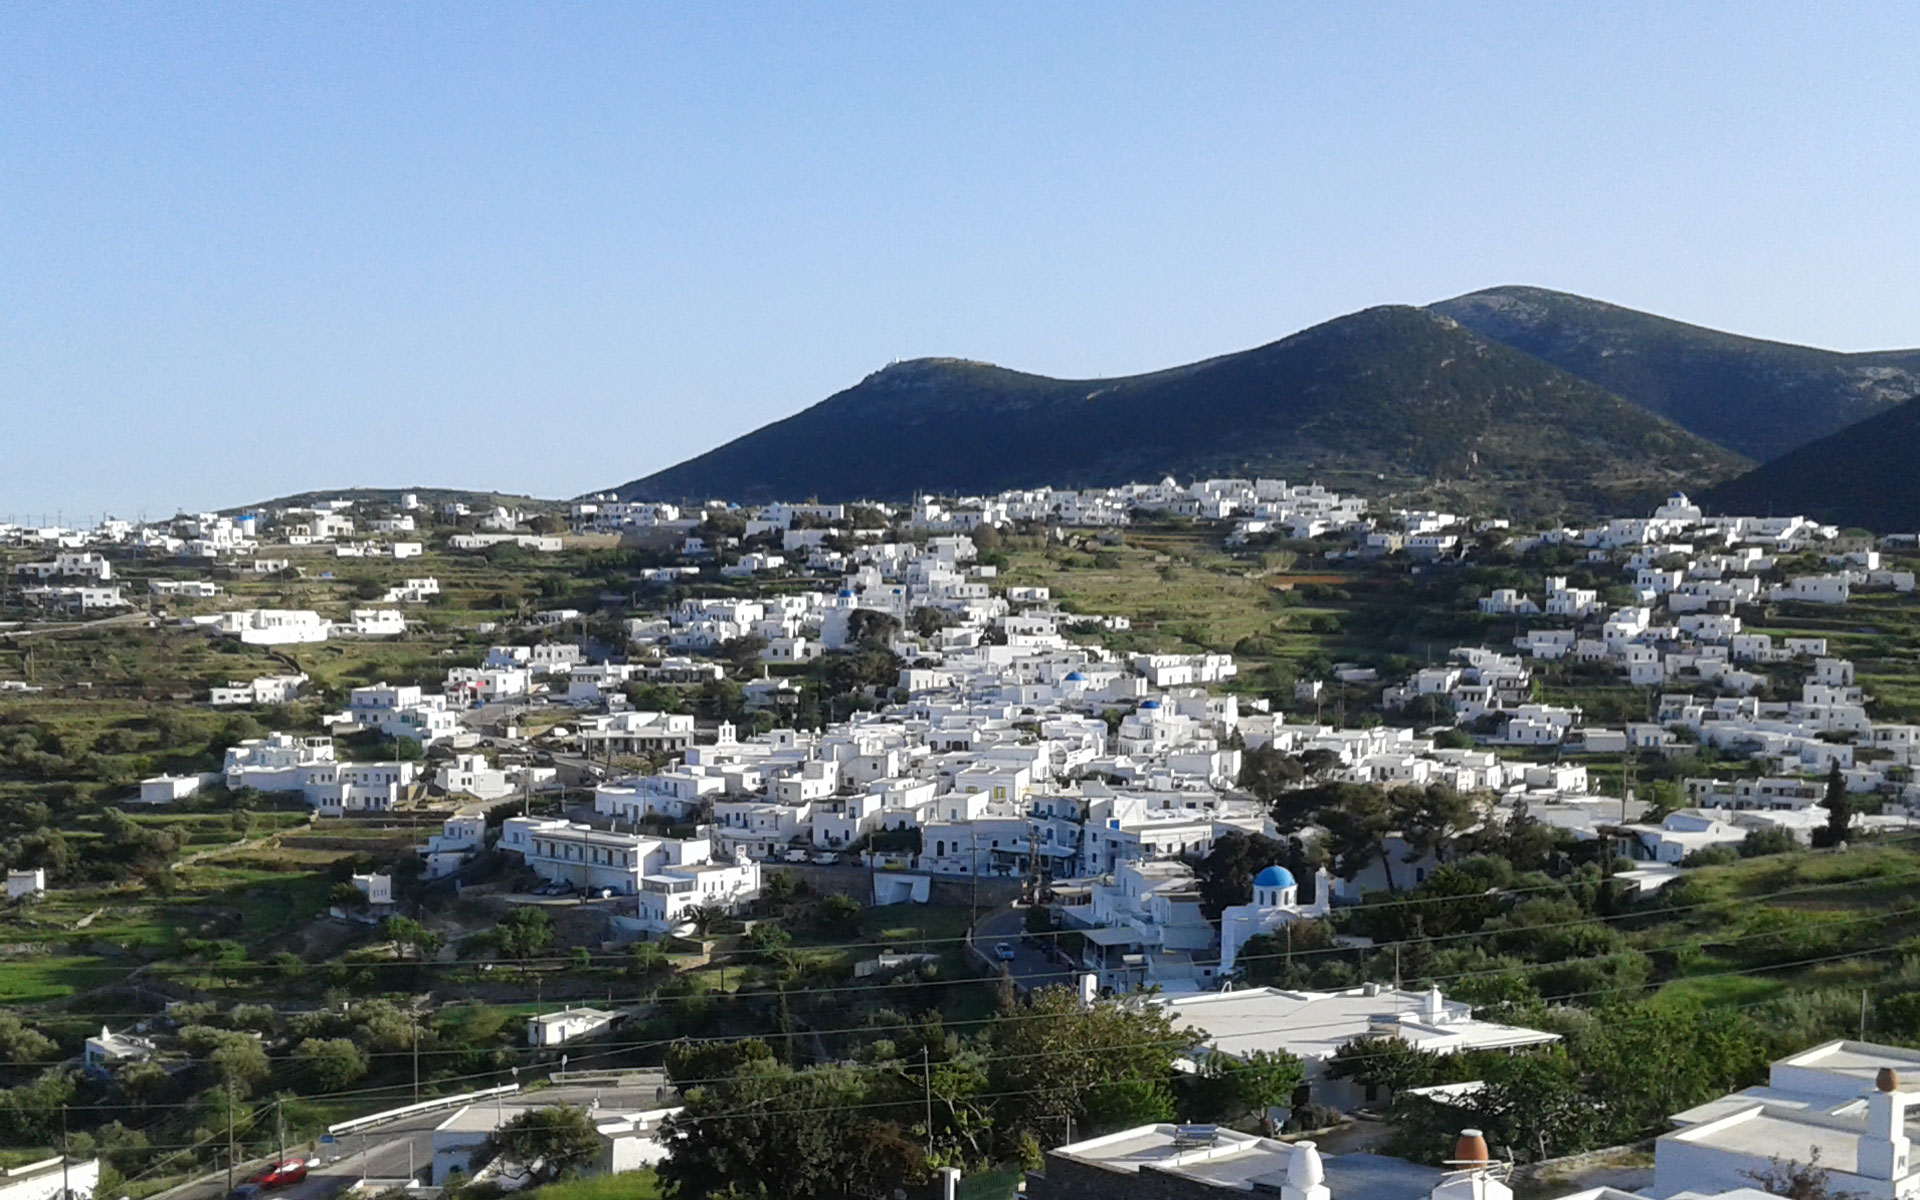 The village of Apollonia in Sifnos